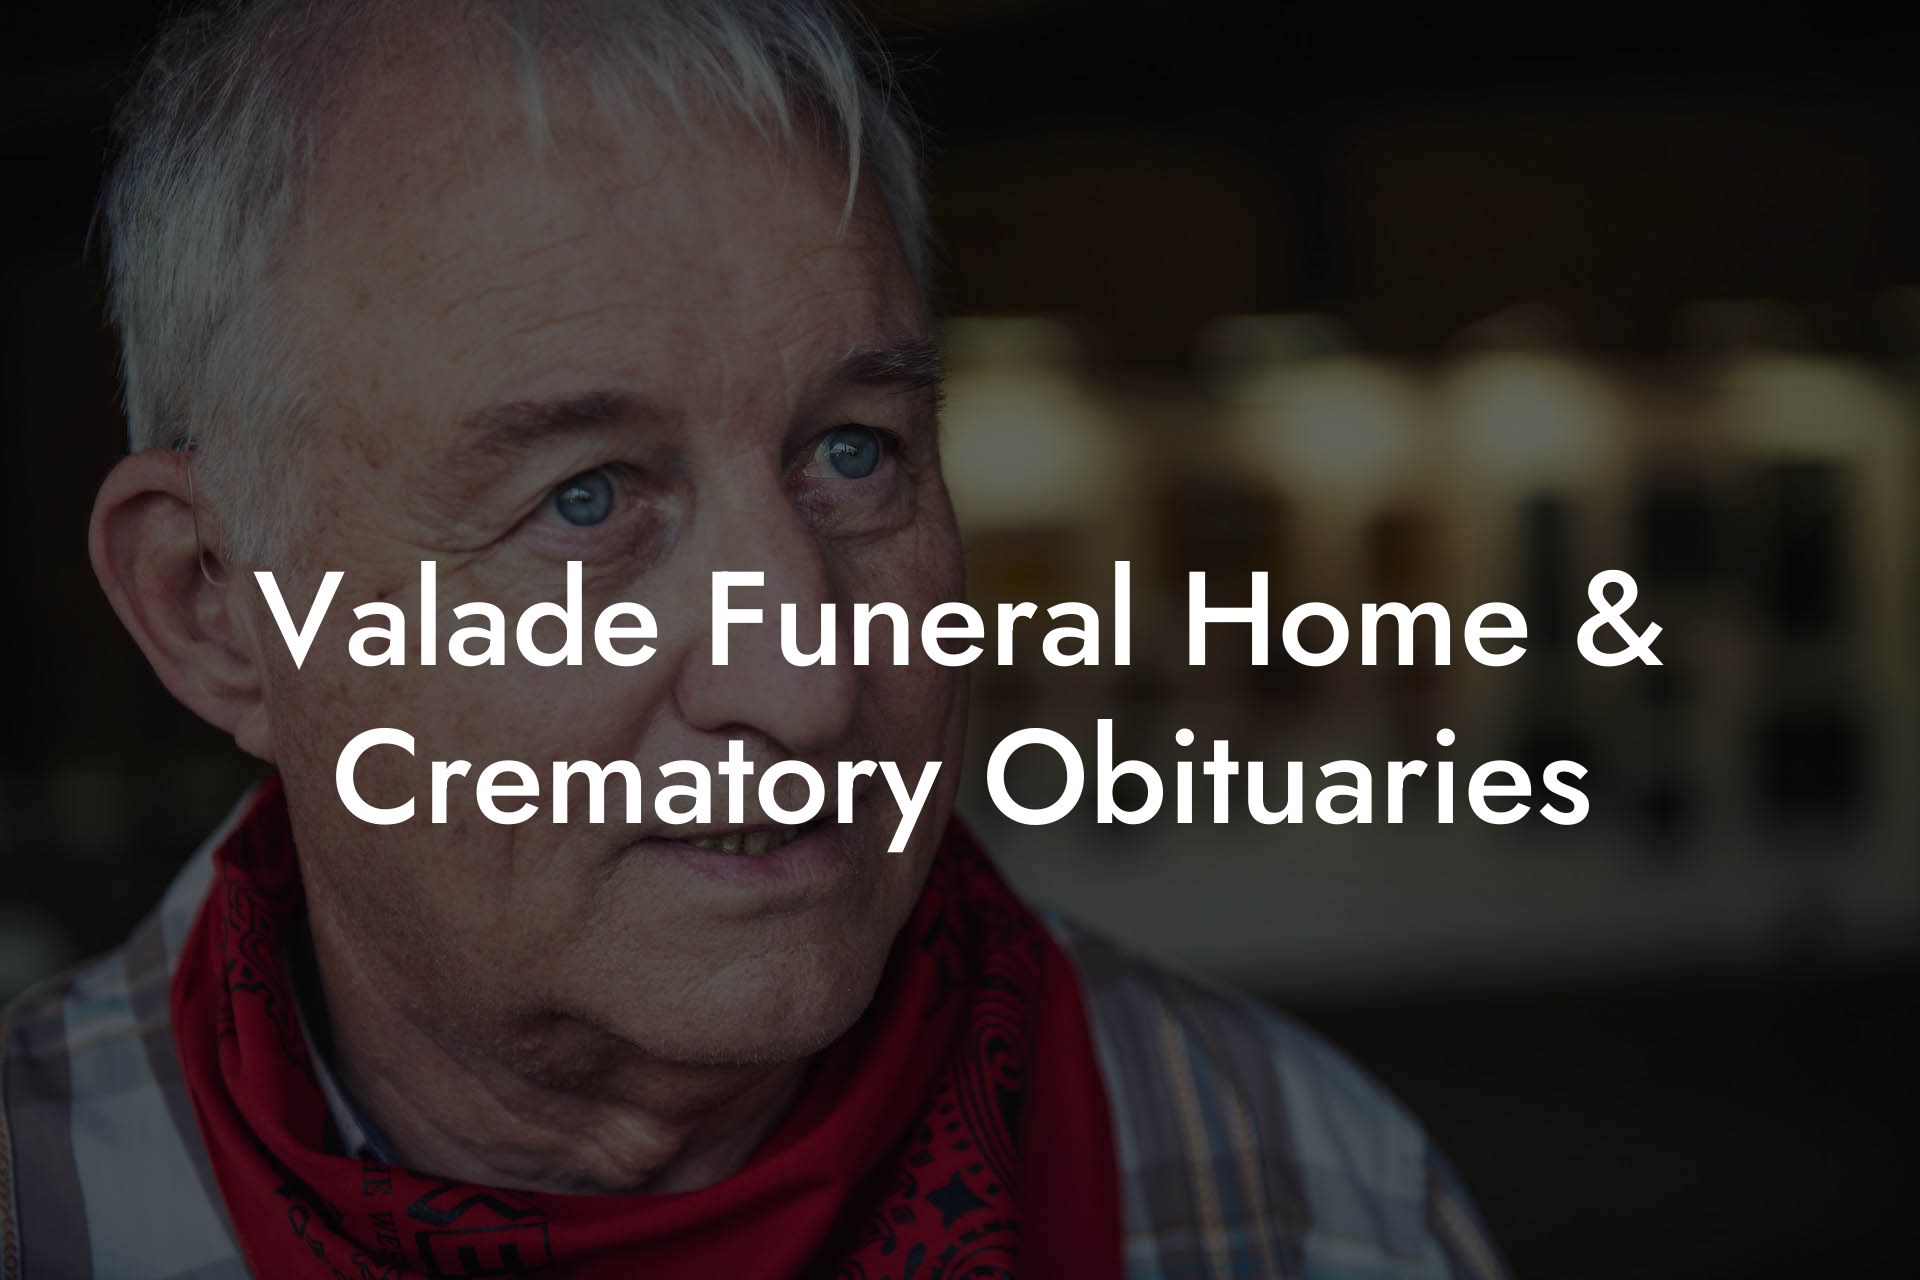 Valade Funeral Home & Crematory Obituaries